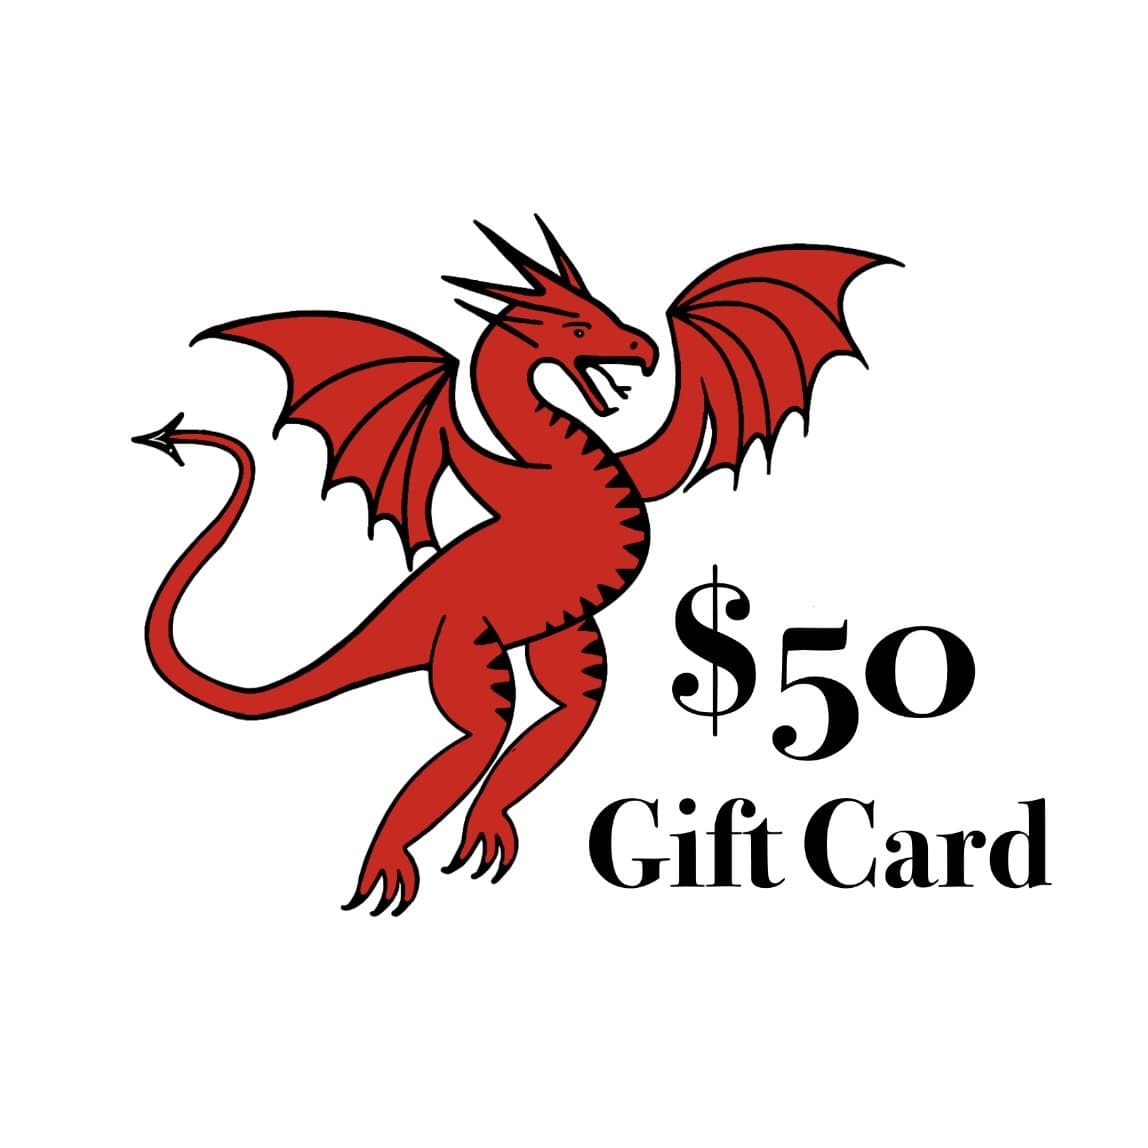 Reptile Realm Gift Cards $50.00 Reptile Realm Gift Card